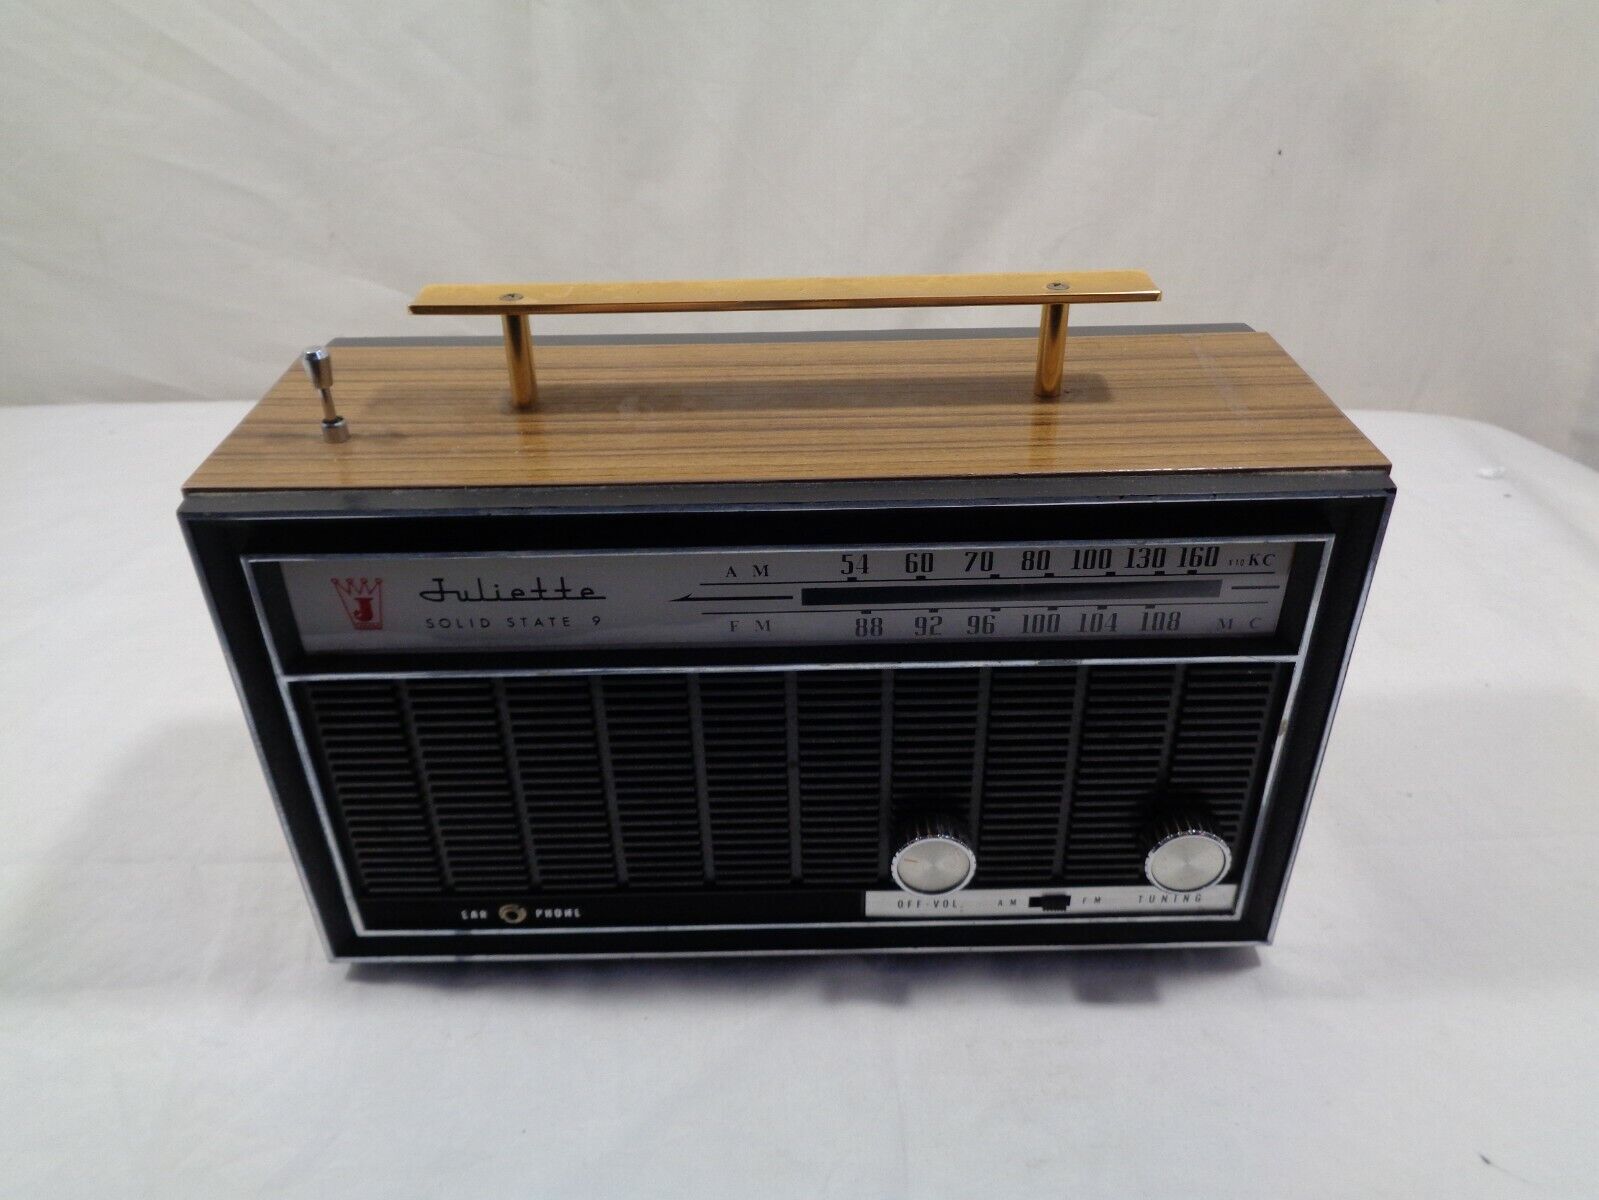 VINTAGE JULIETTE SOLID STATE INSTANT SOUND RADIO (AS-IS FOR PARTS ONLY) # A-909